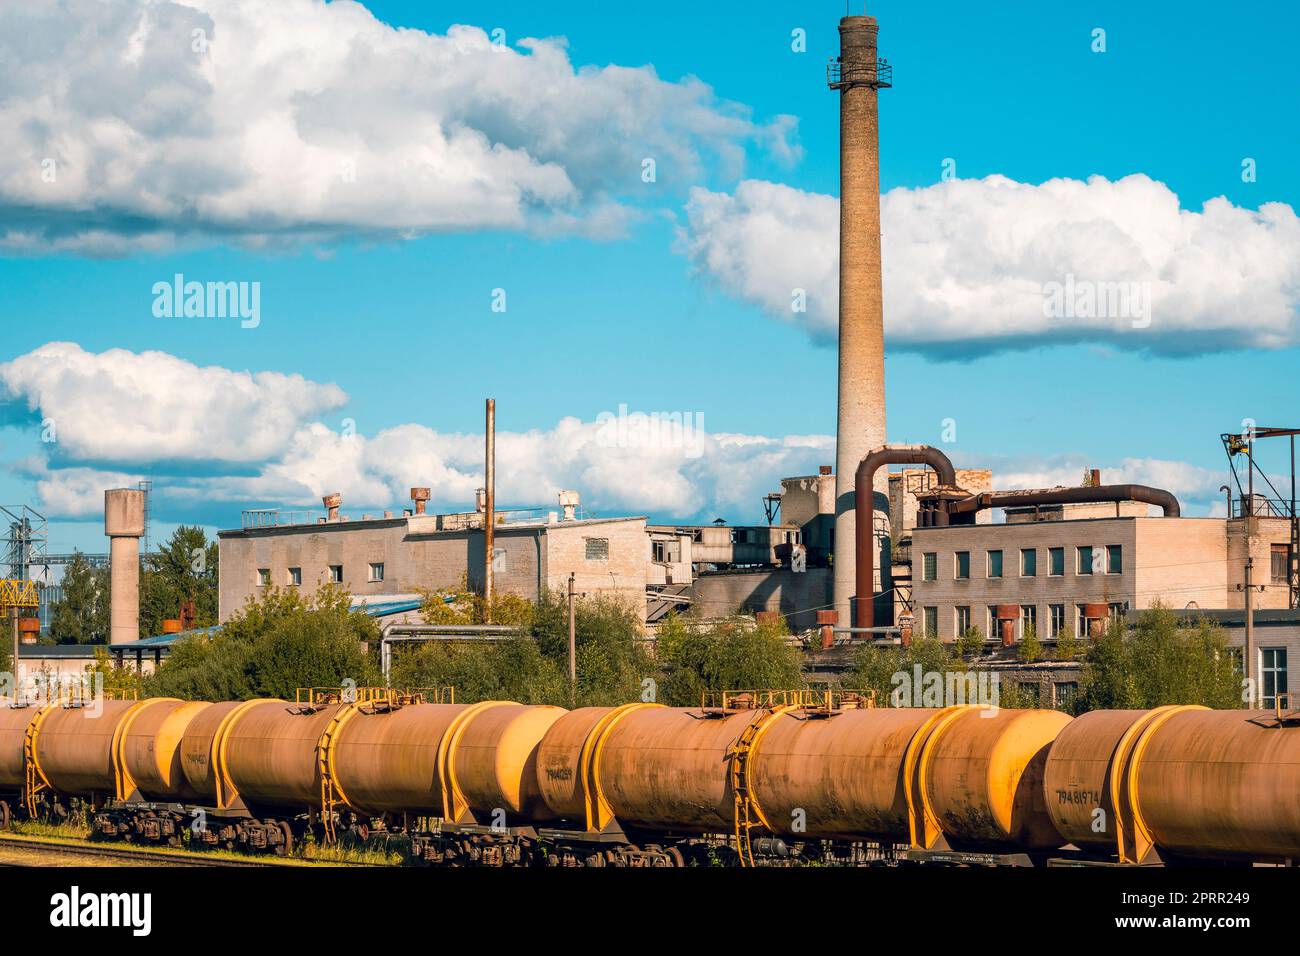 Railway passes through the industrial area with a big plant Stock Photo